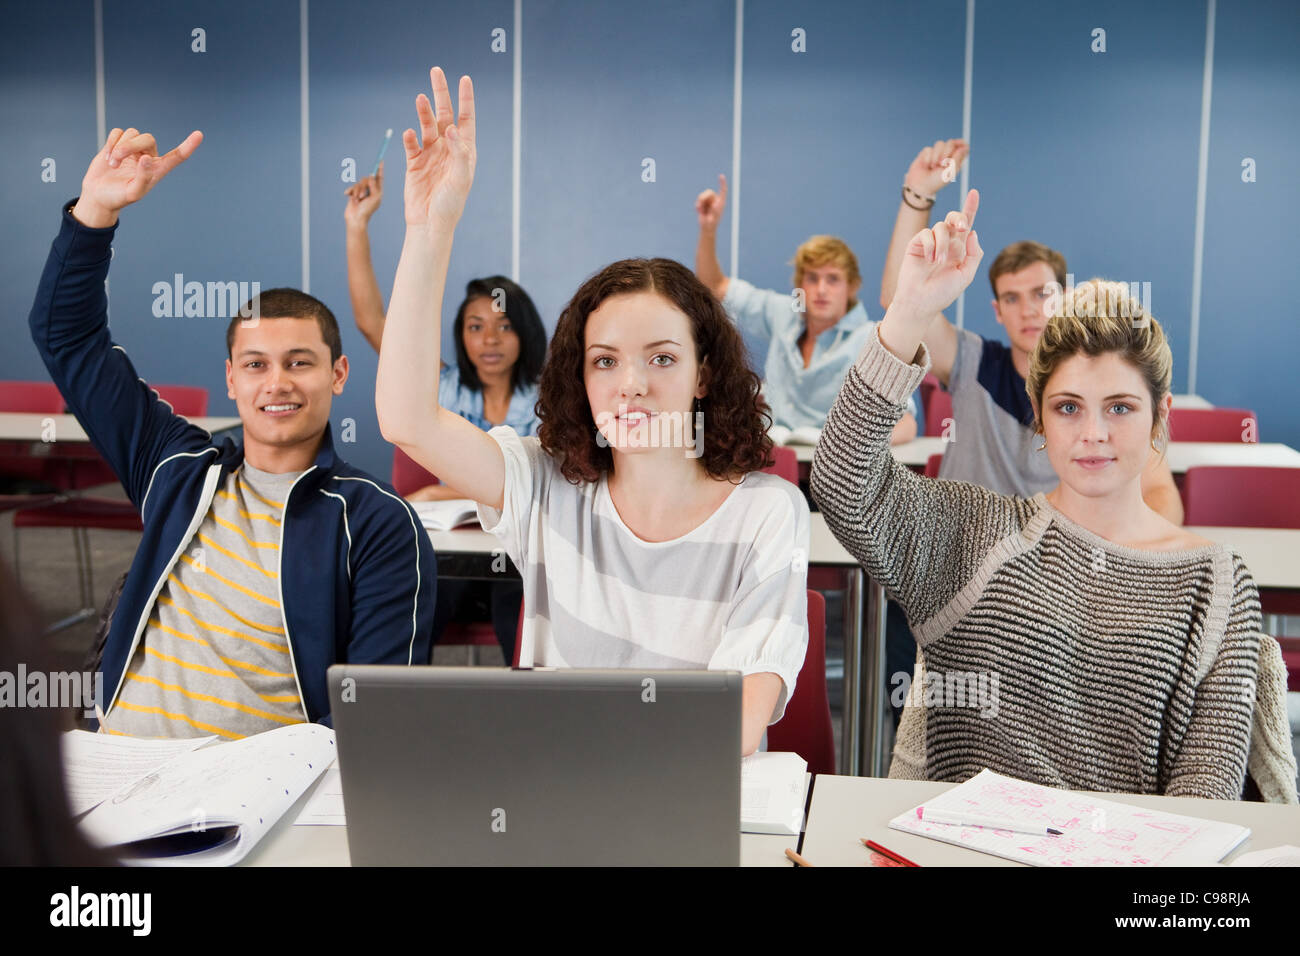 University students holding up hands class Stock Photo